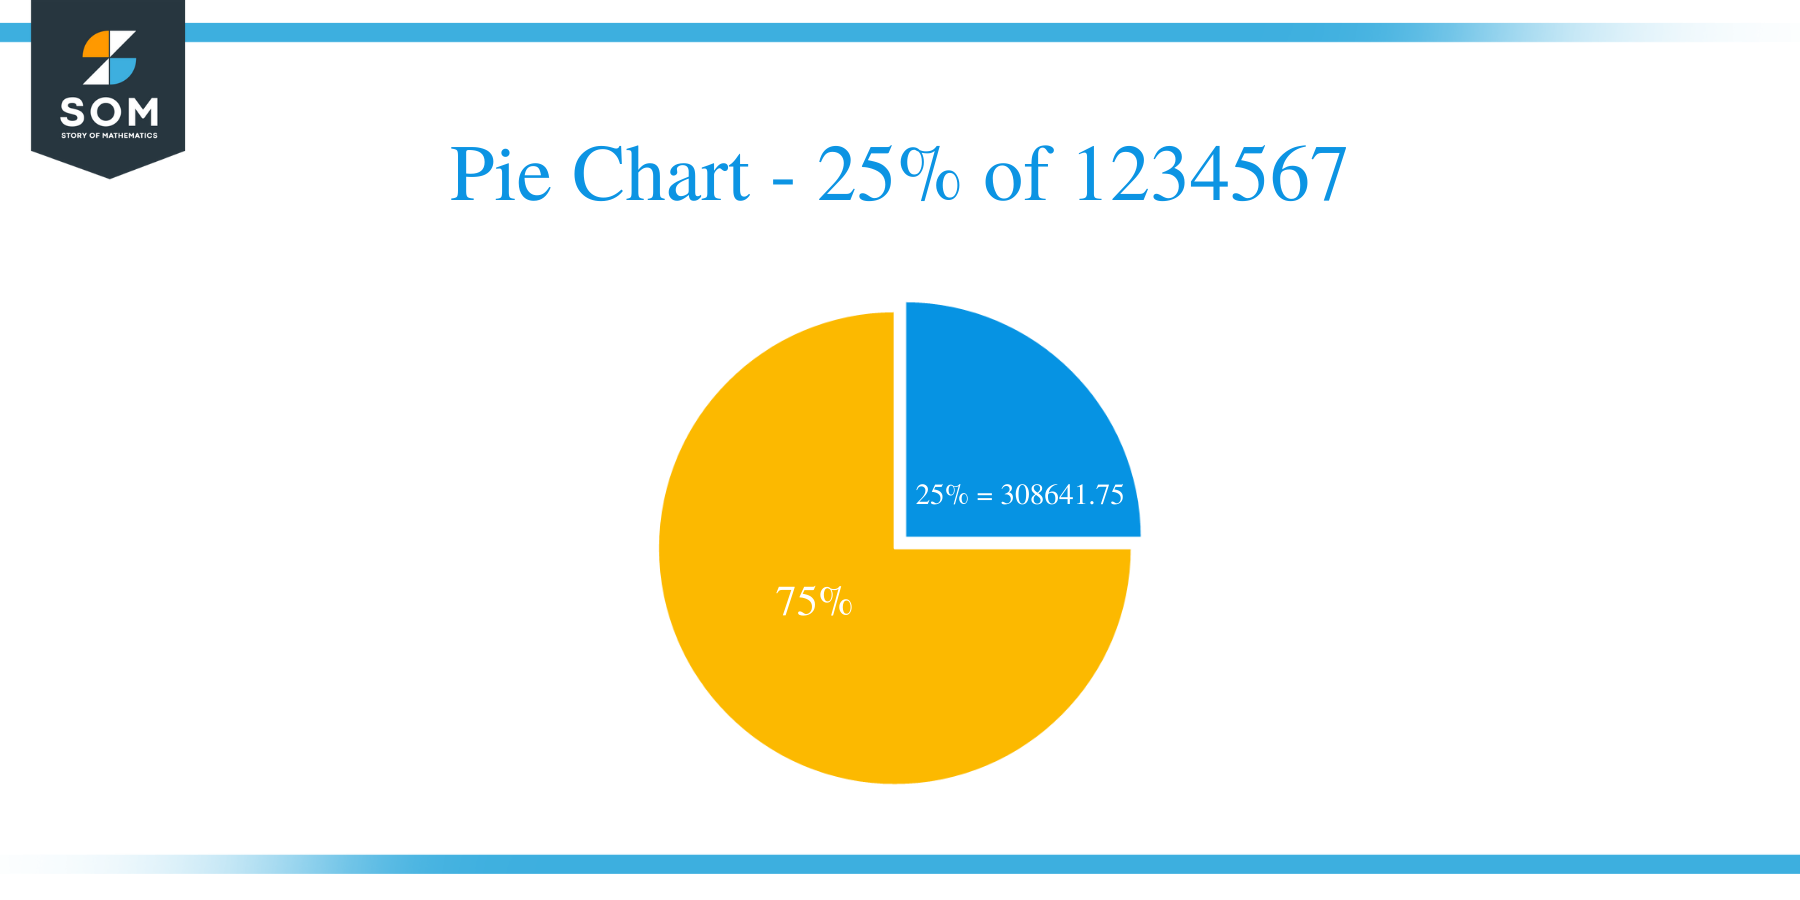 pie chart of 25 percent of 1234567